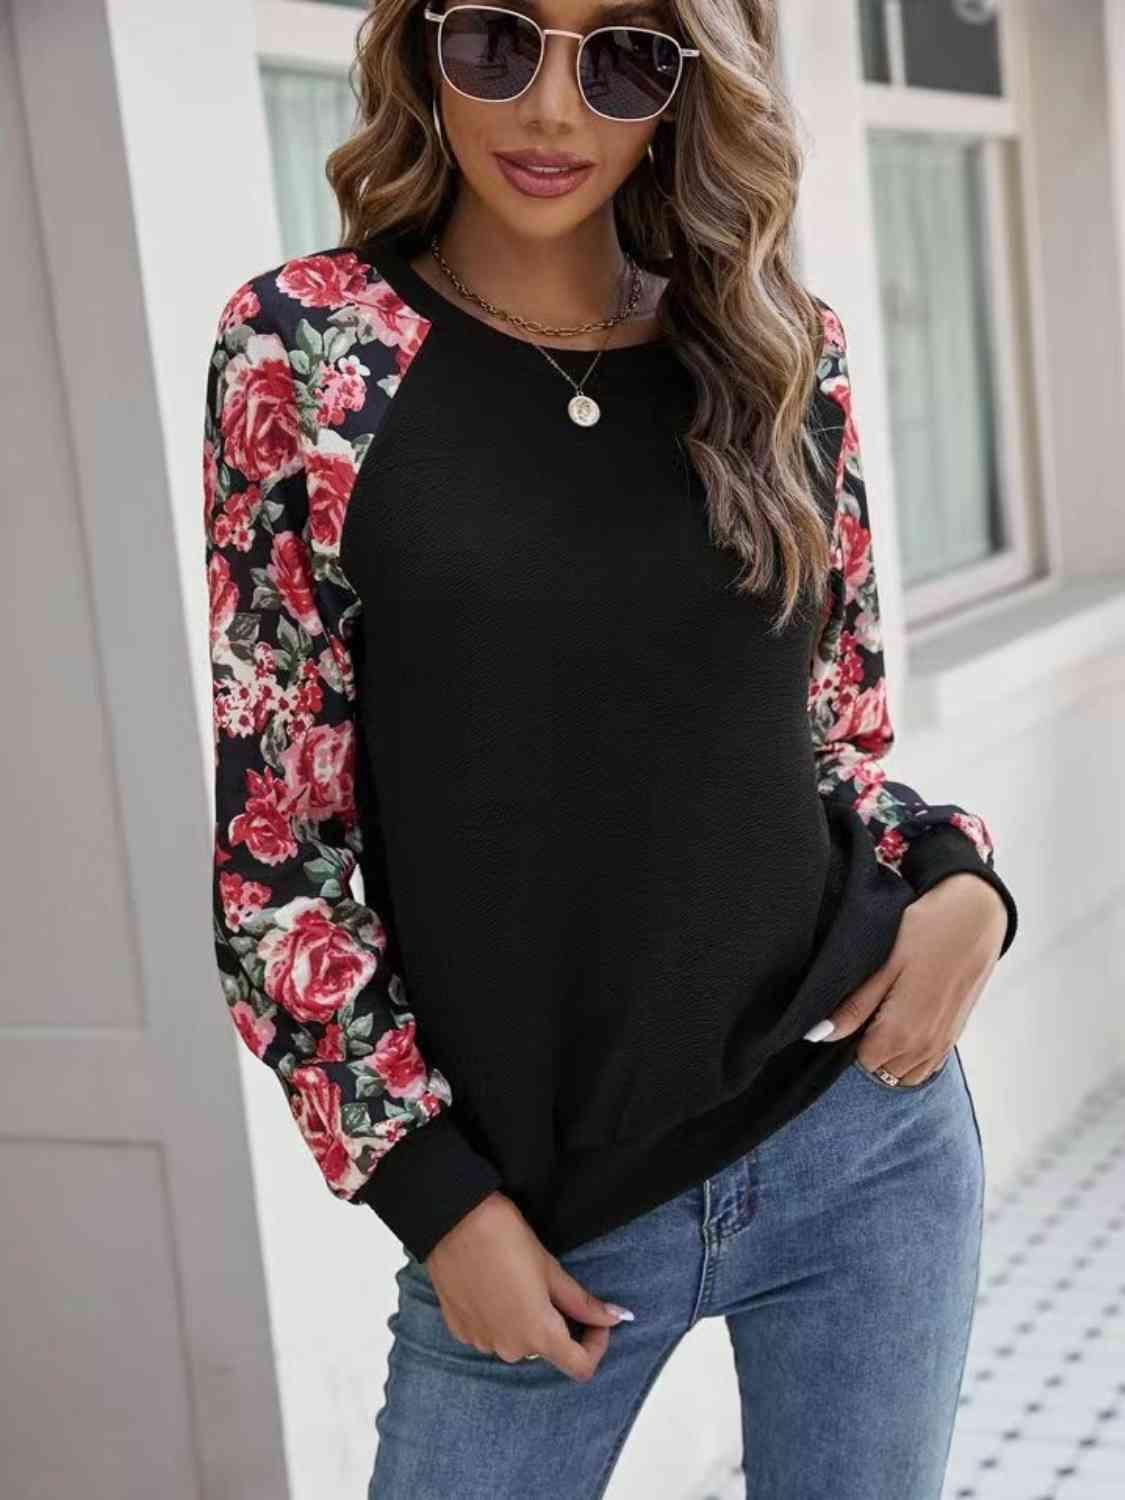 a woman wearing a black and floral top